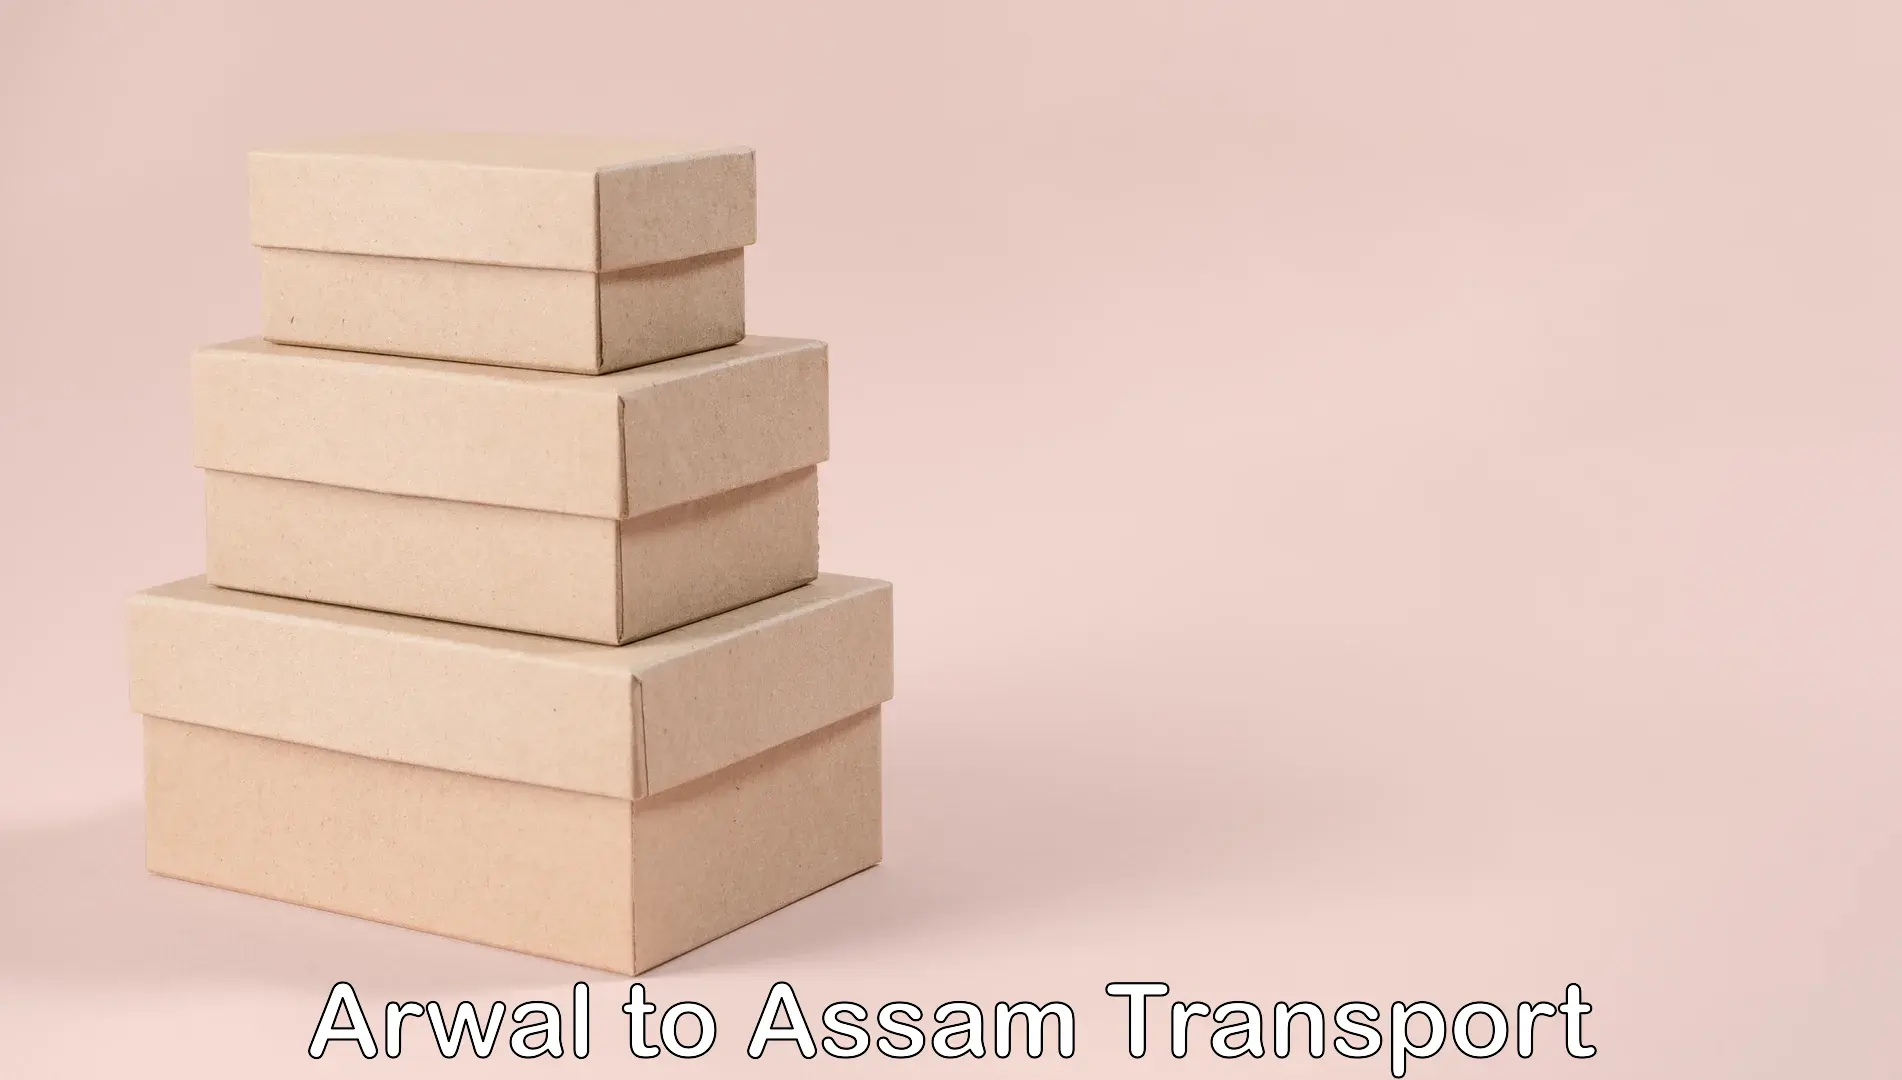 Lorry transport service Arwal to Lala Assam